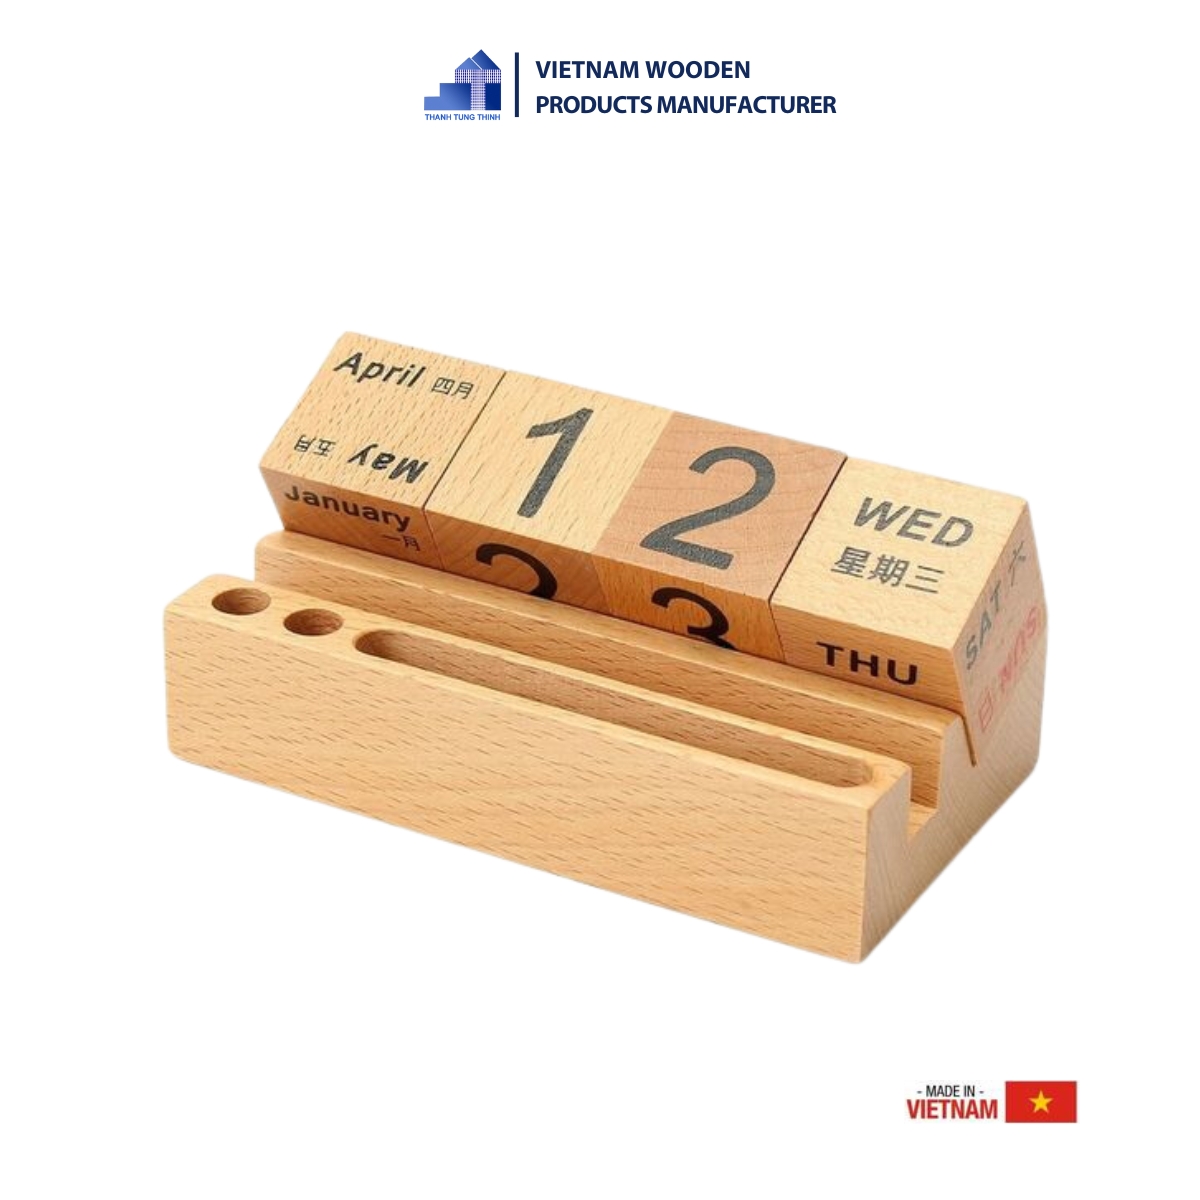 Style meets functionality with this wooden desk calendar.